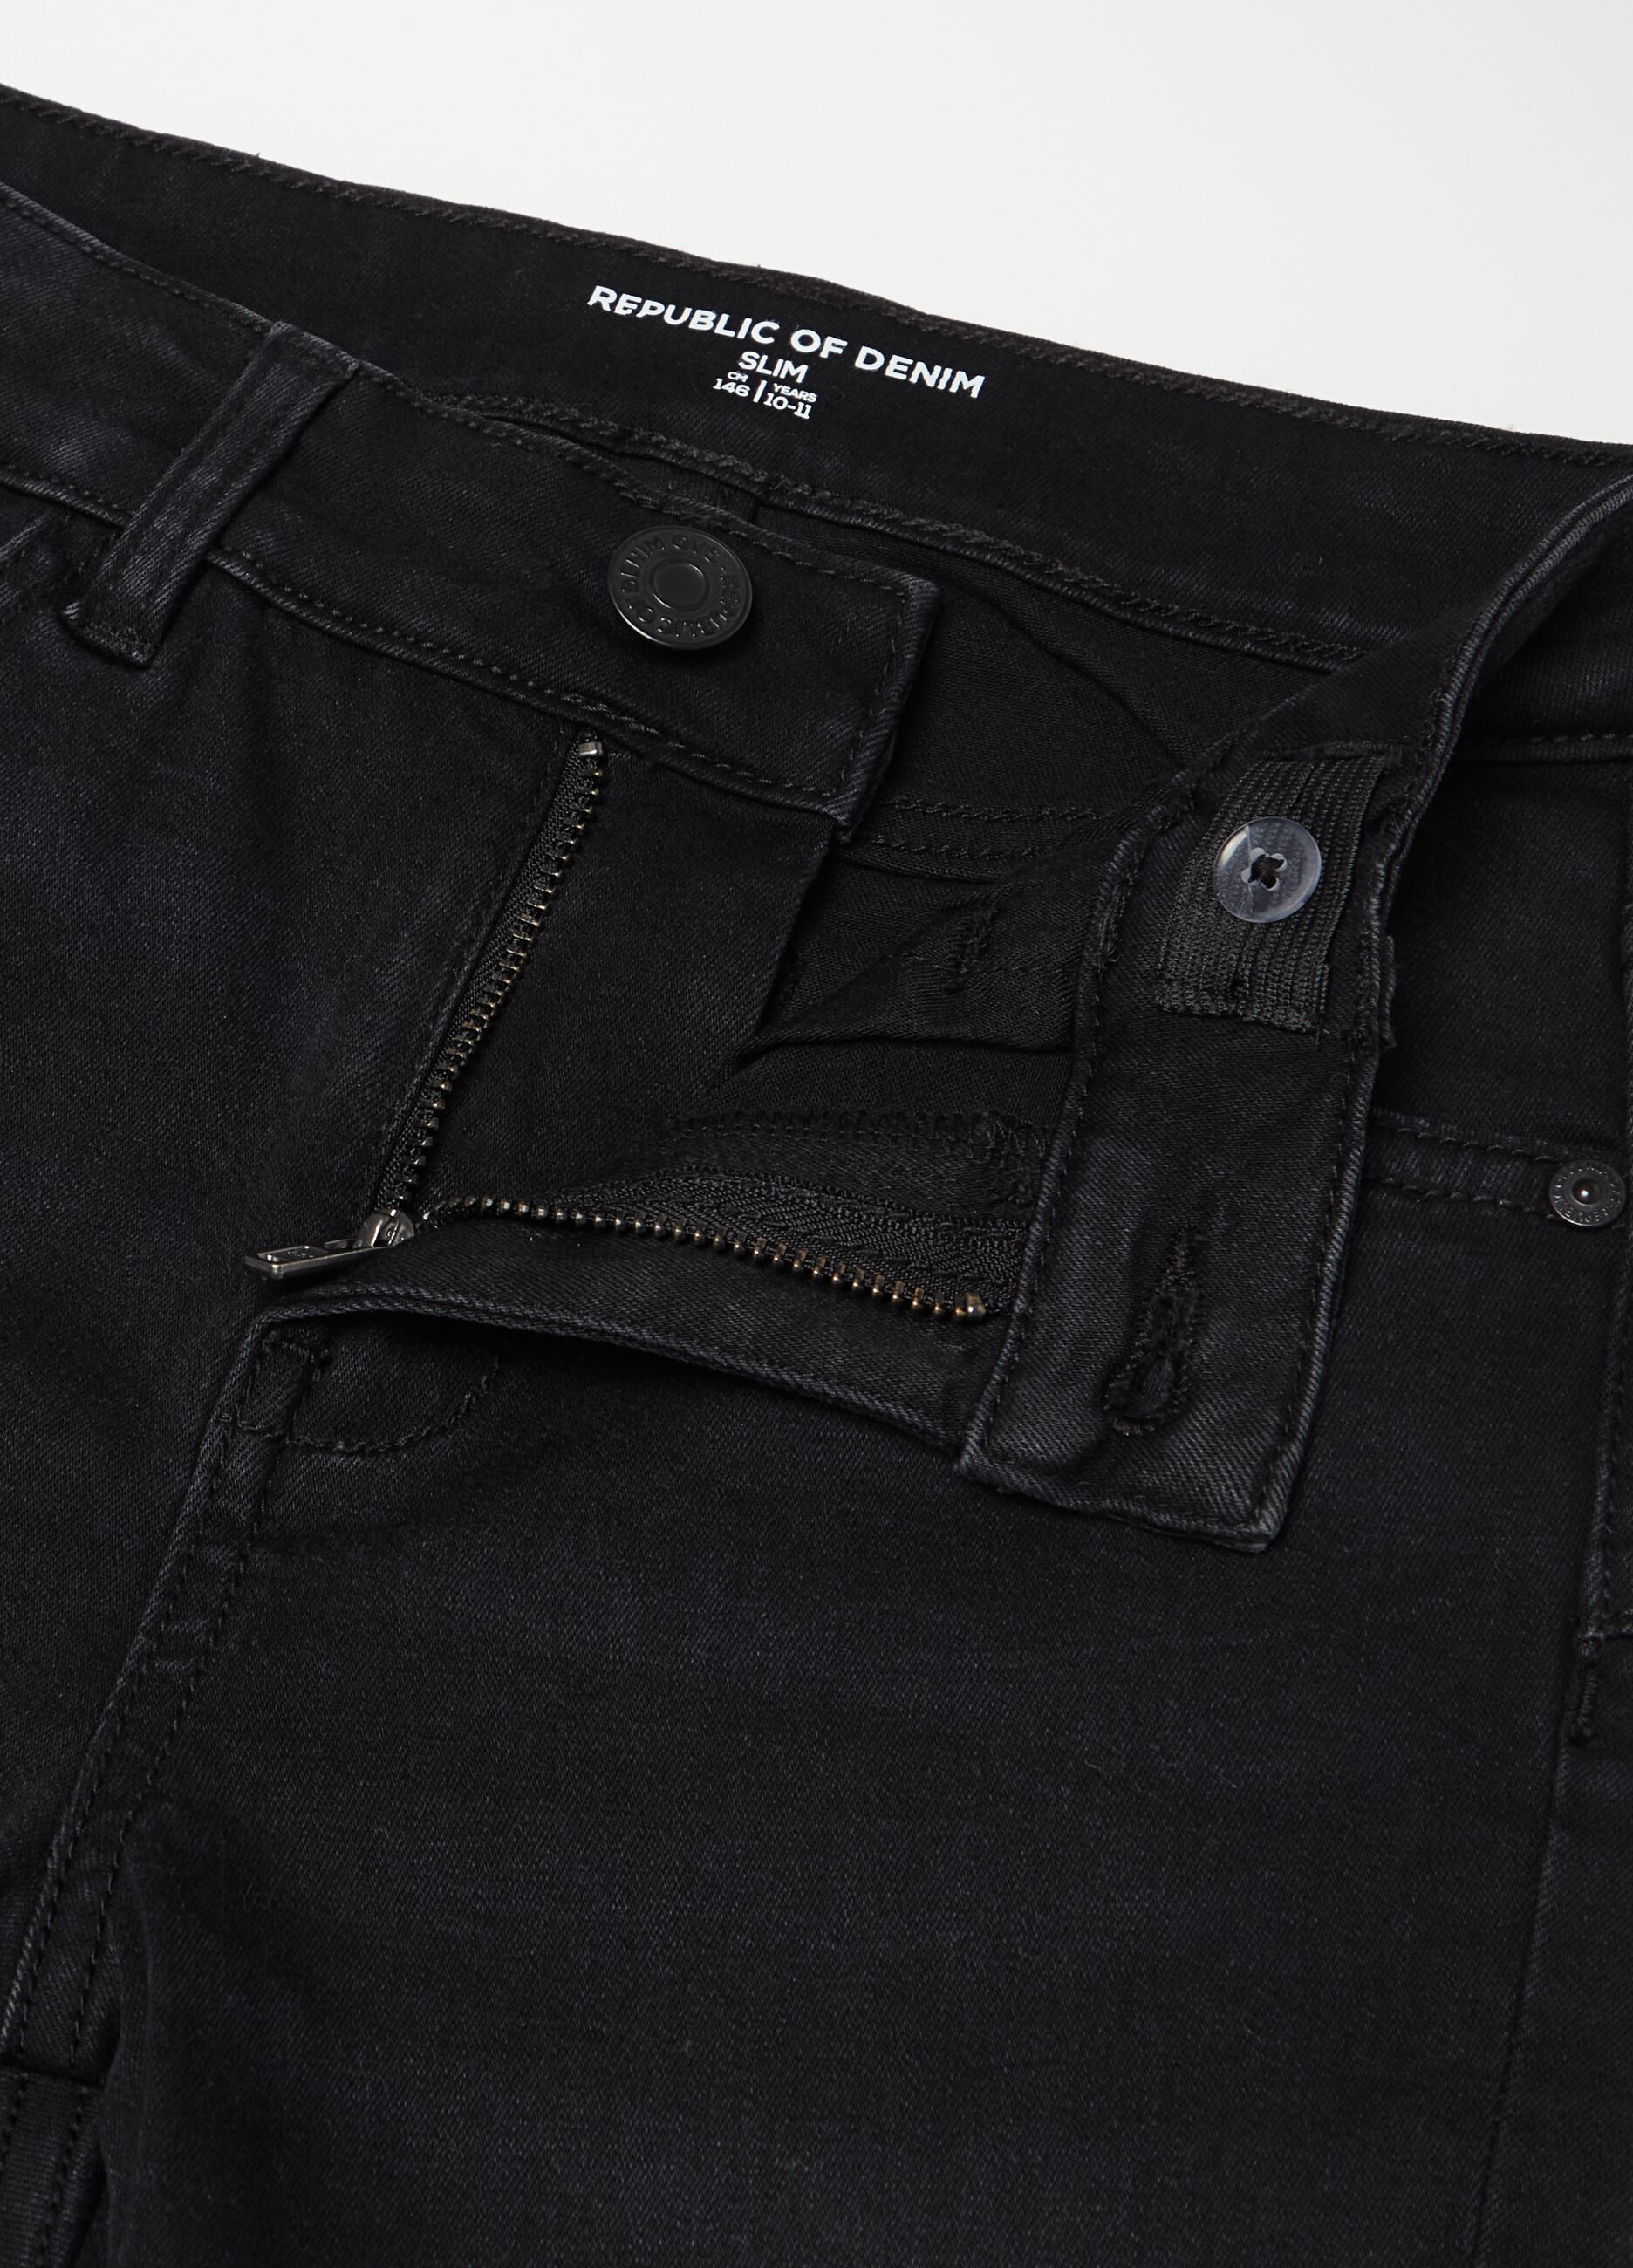 Slim-fit jeans with five pockets